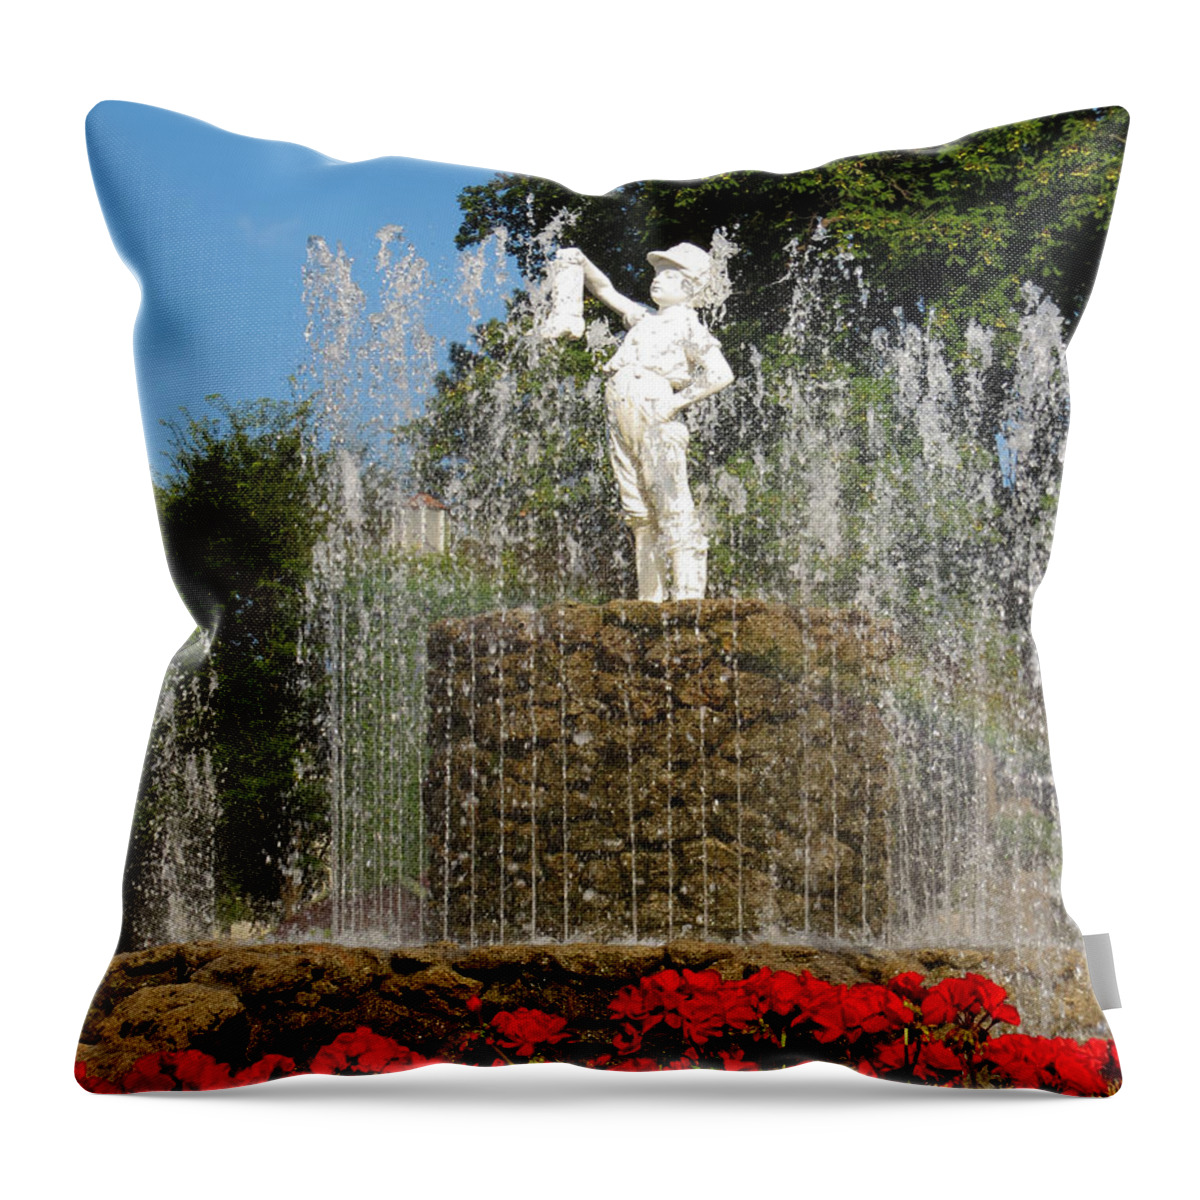 Fountain Throw Pillow featuring the photograph Boy With The Boot 3 by Shawna Rowe